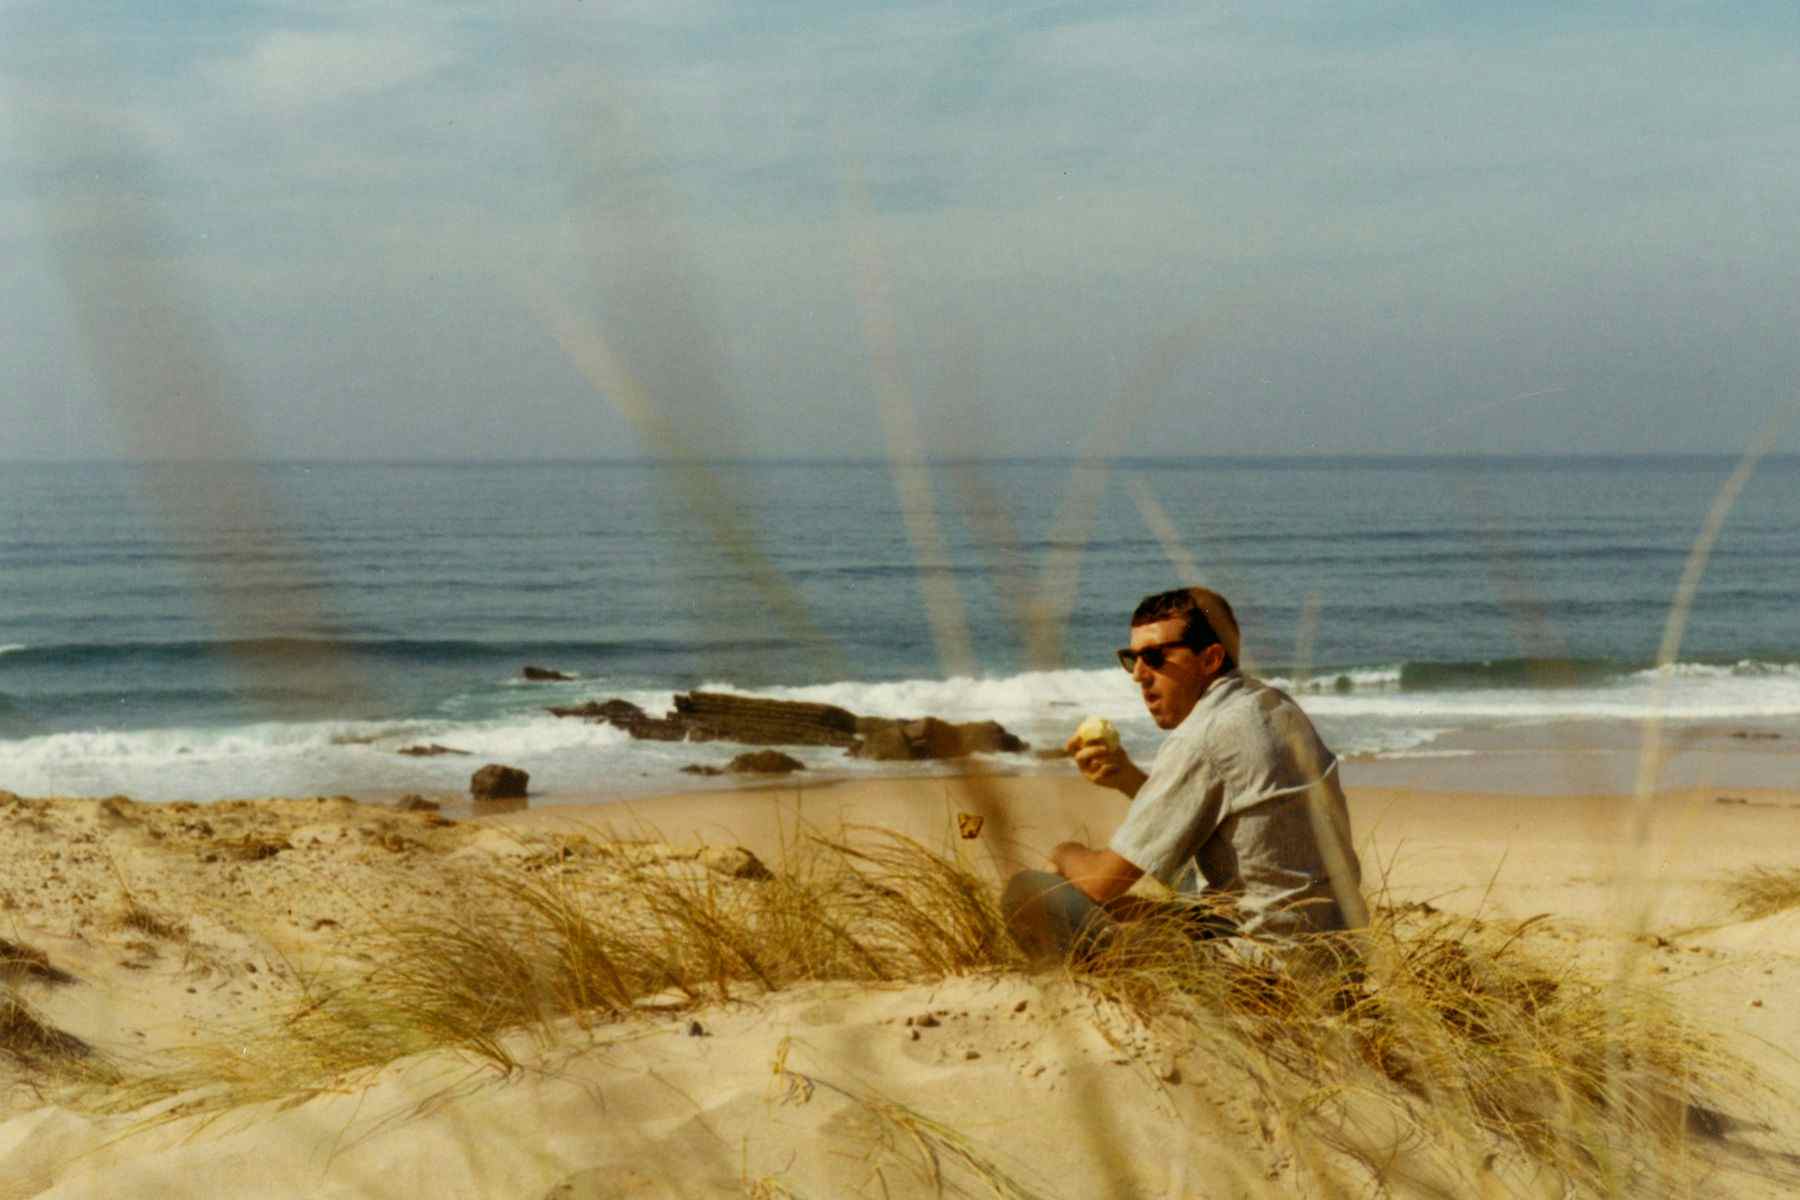 dick metz at cape st francis in 1960